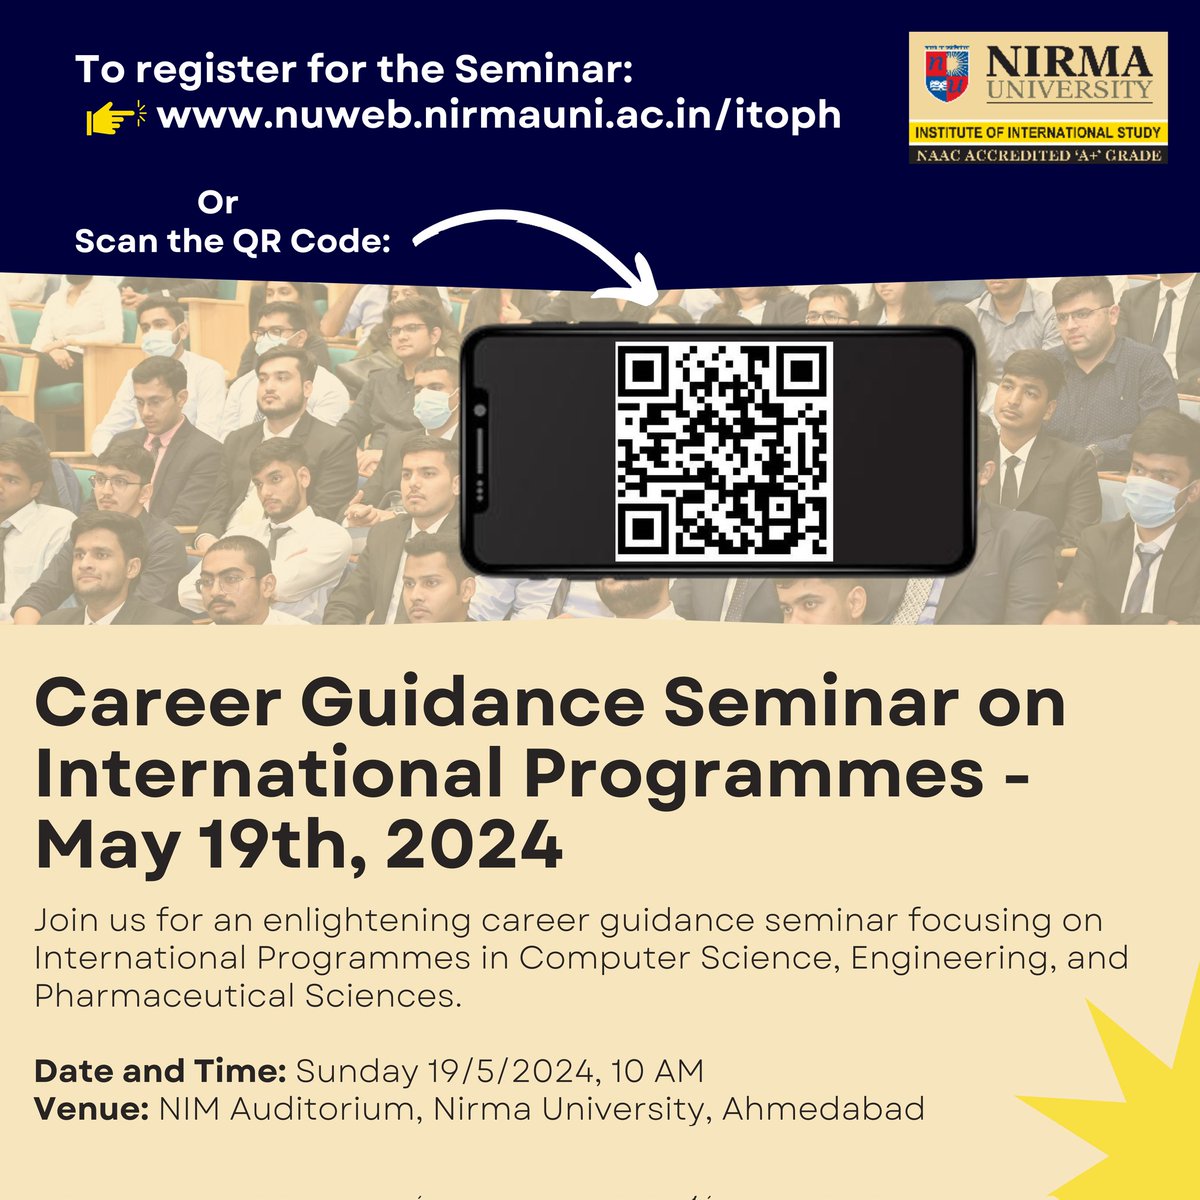 Discover International Programmes in Computer Science, Engineering, & Pharmaceutical Sciences! Career guidance seminar for 12th STD students & parents on Sunday, May 19th, 10 AM at Nirma University, Ahmedabad. Register at nuweb.nirmauni.ac.in/itoph/ #NirmaUniversity #CareerGuidance